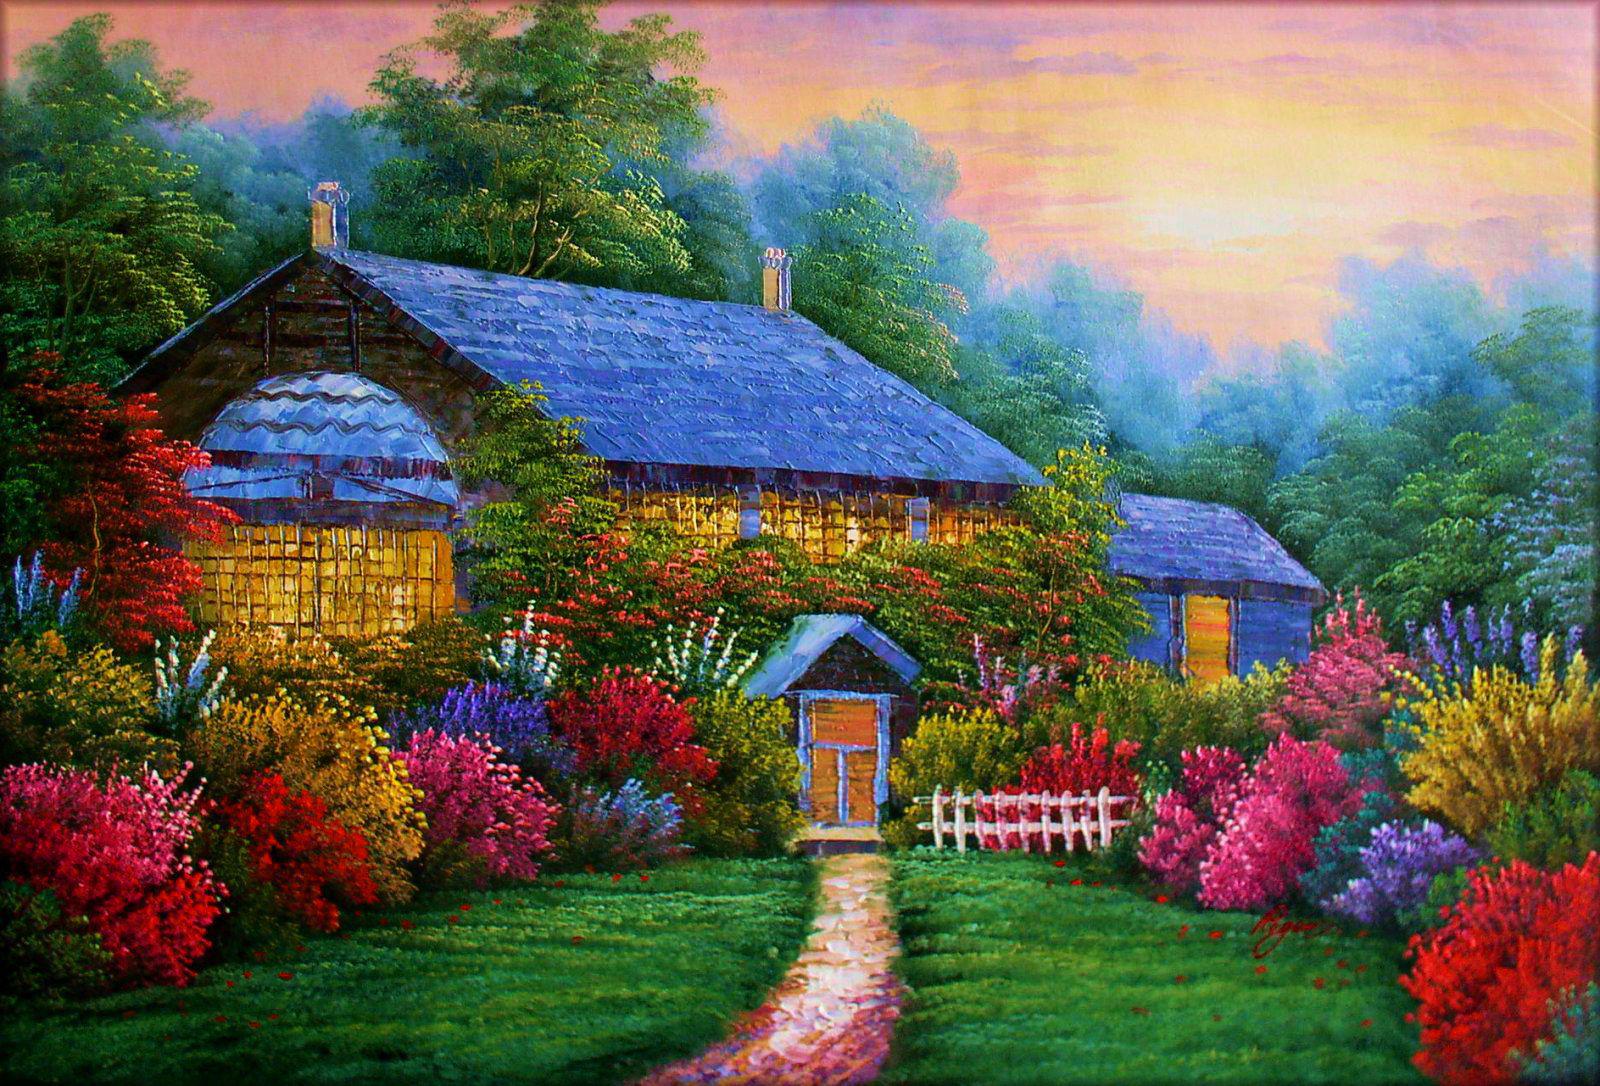 Cottage Wallpapers Wallpaper Cave - Bank2home.com